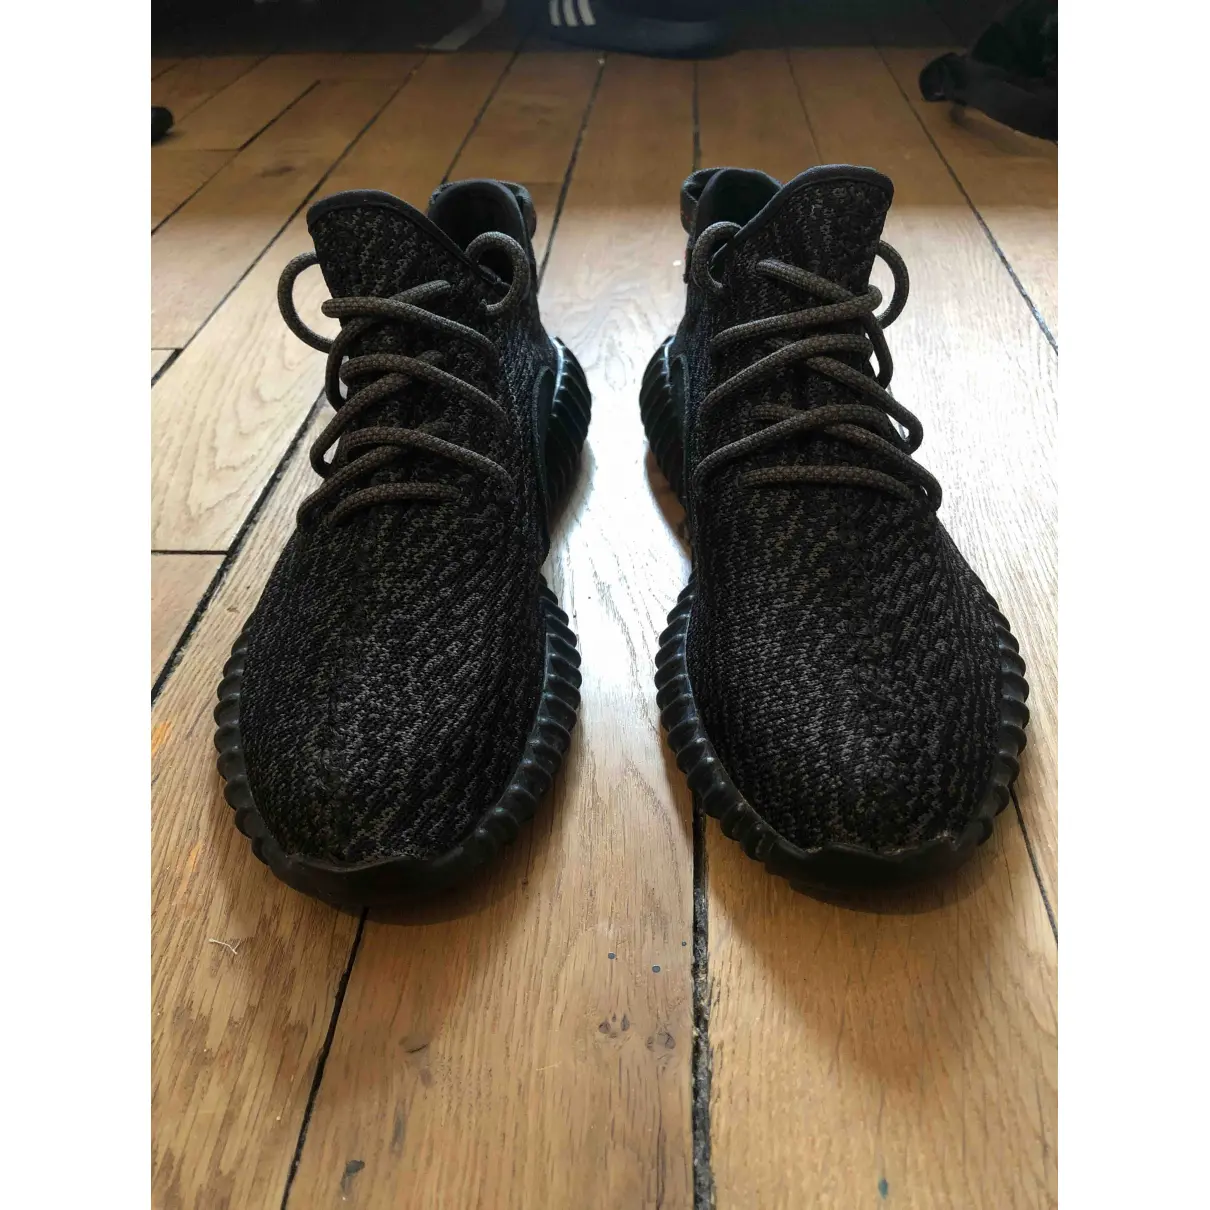 Buy Yeezy x Adidas Boost 350 V1 cloth low trainers online